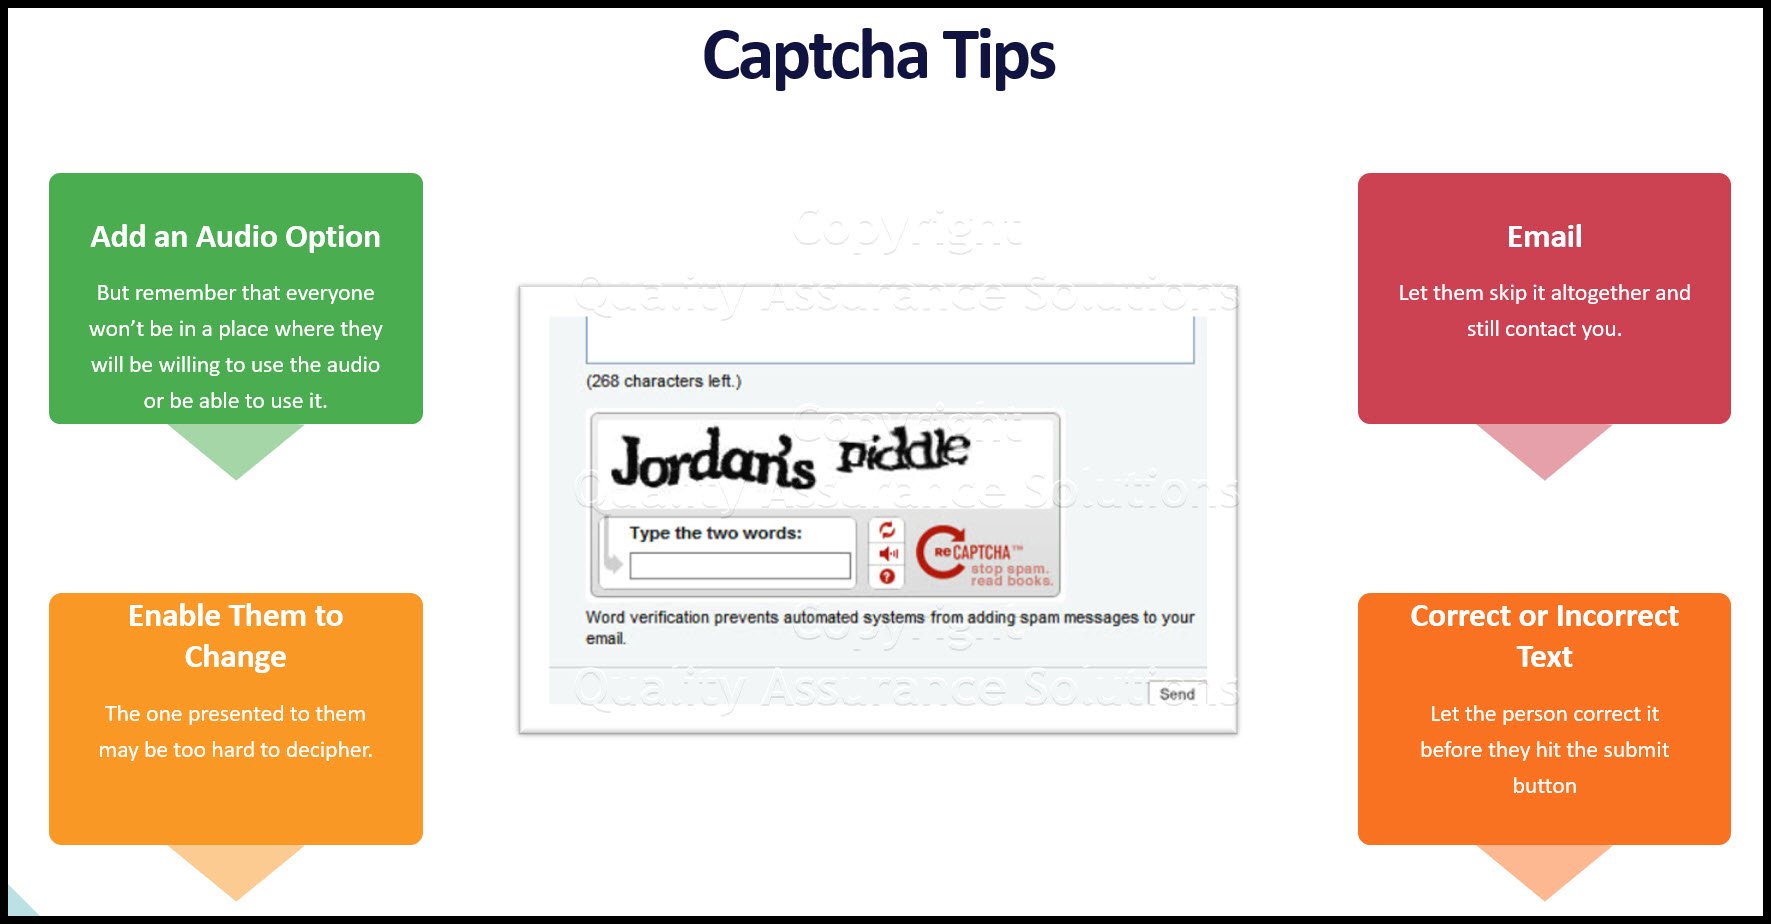 Does your website captcha work? Is the coptcha killing your copy results? Use these tips to improve your captcha situation